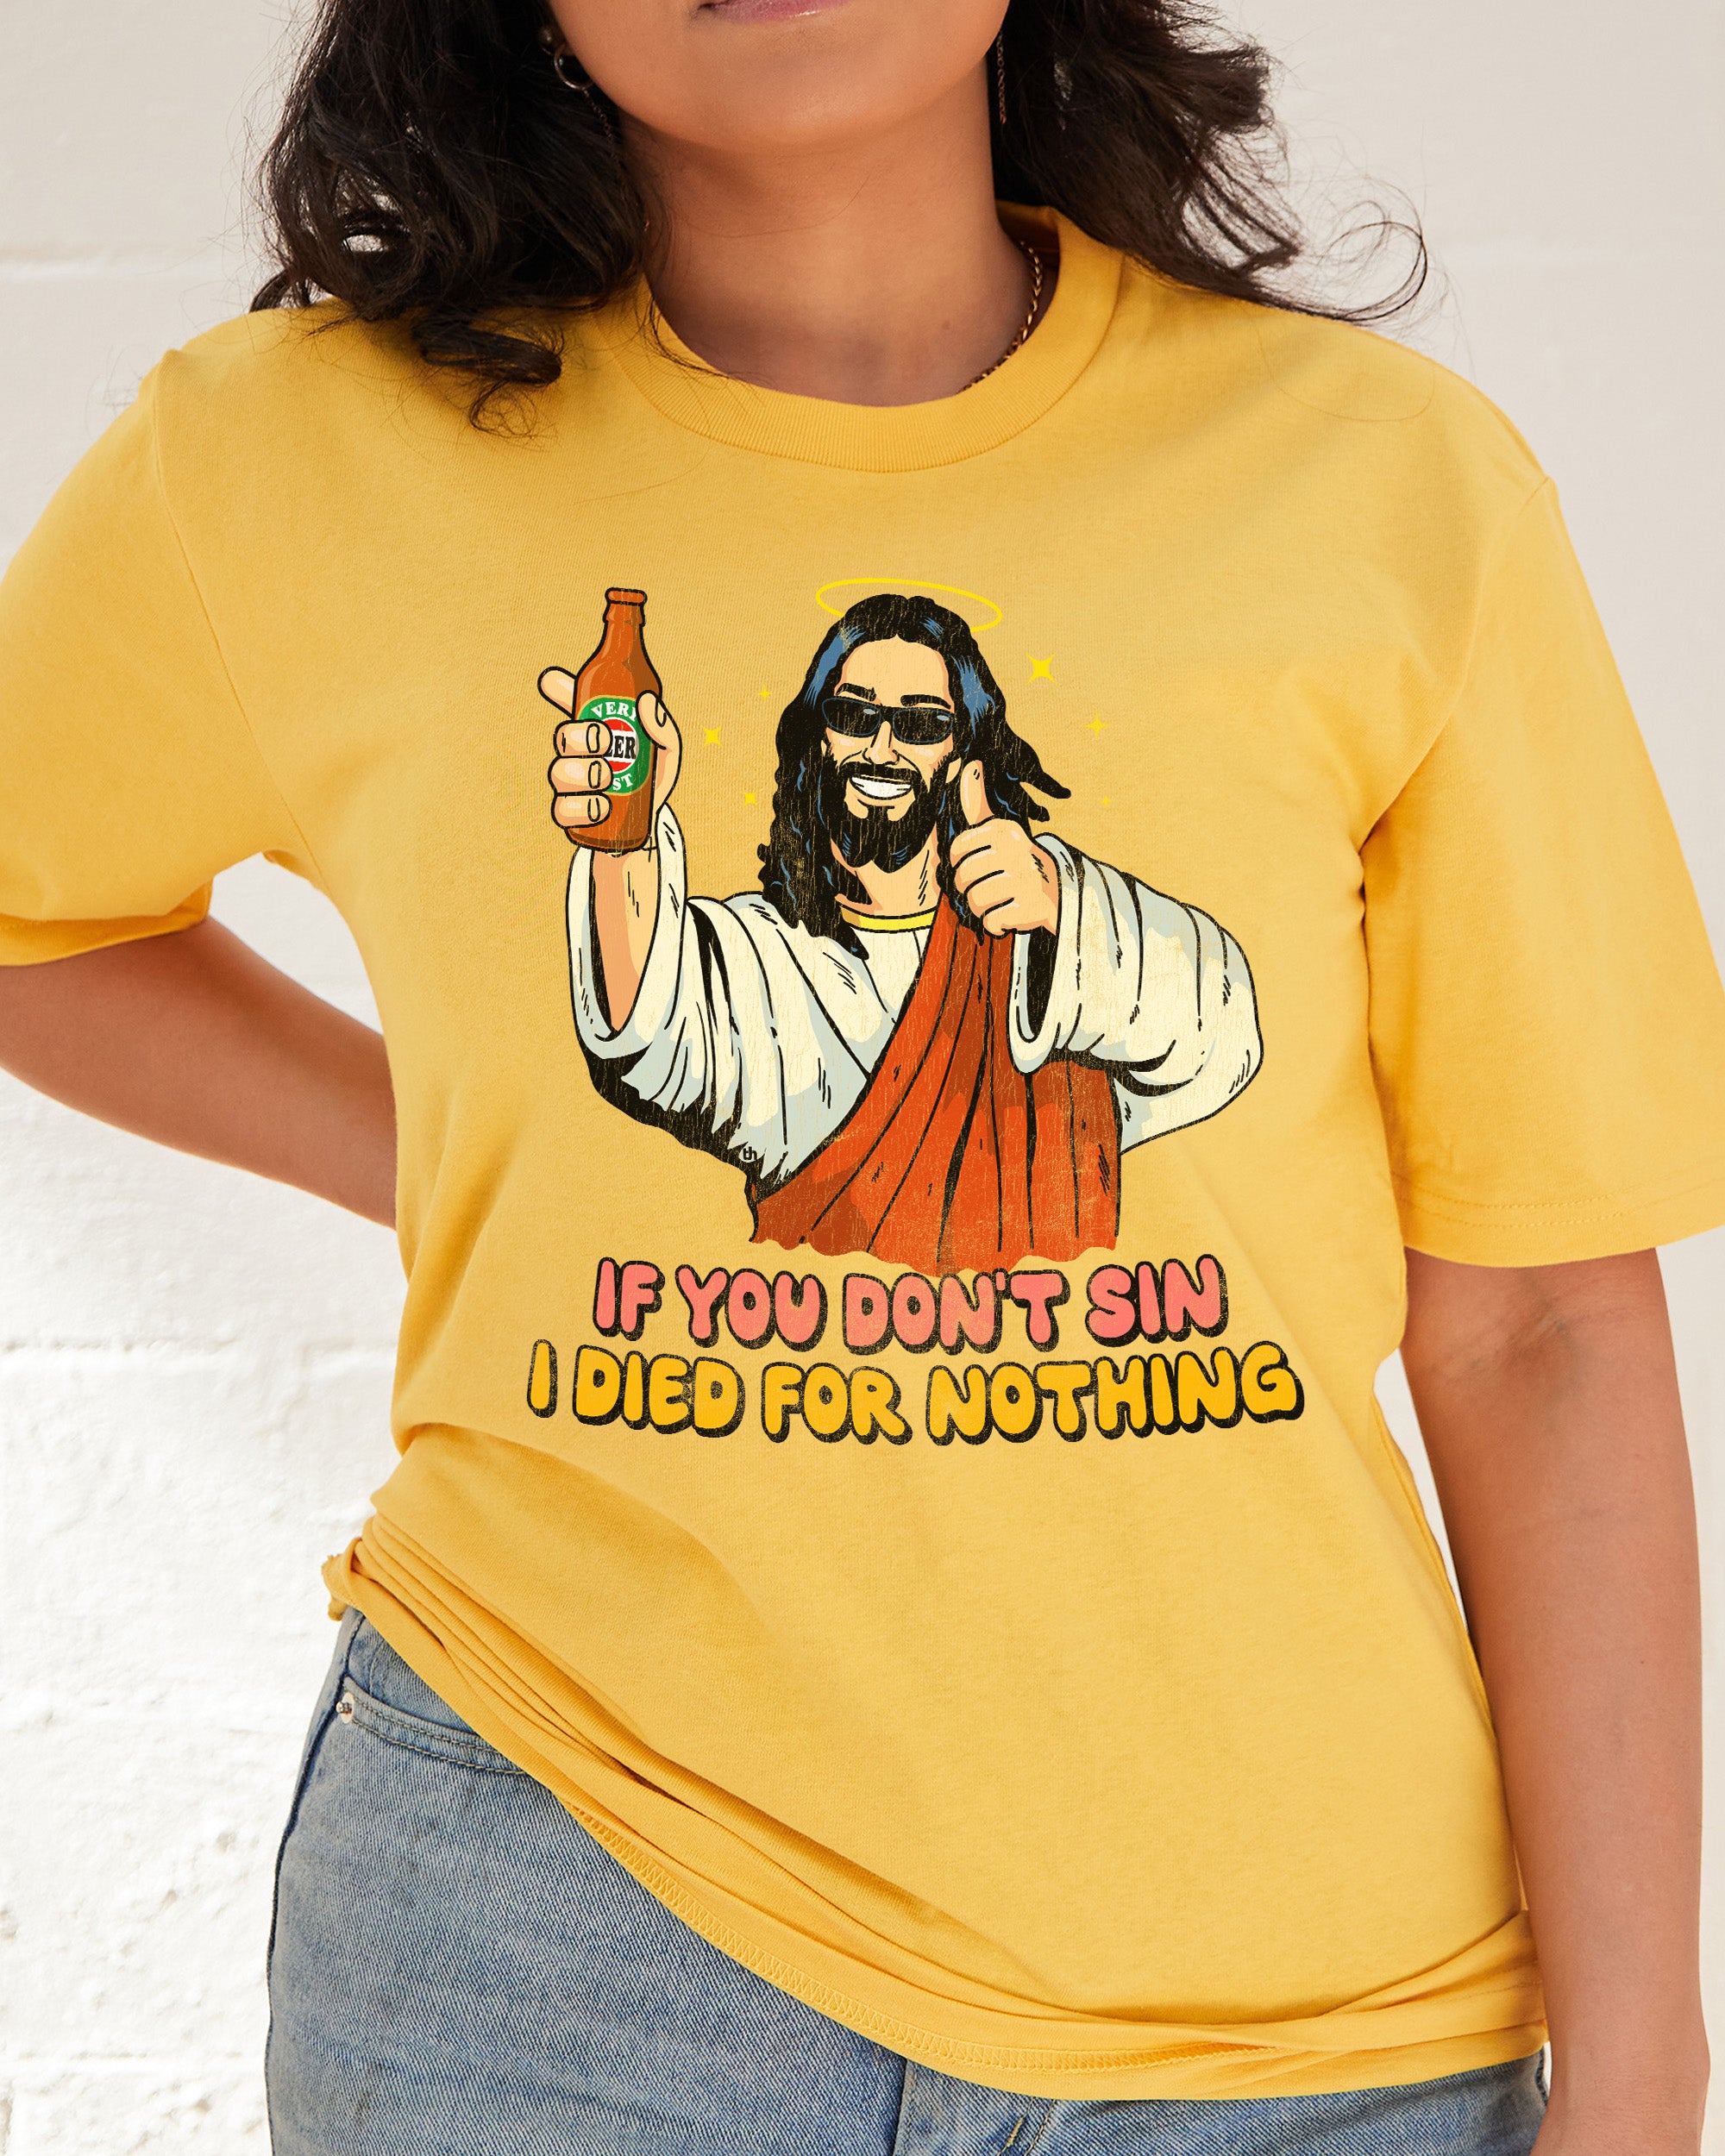 If You Don't Sin I Died for Nothing T-Shirt